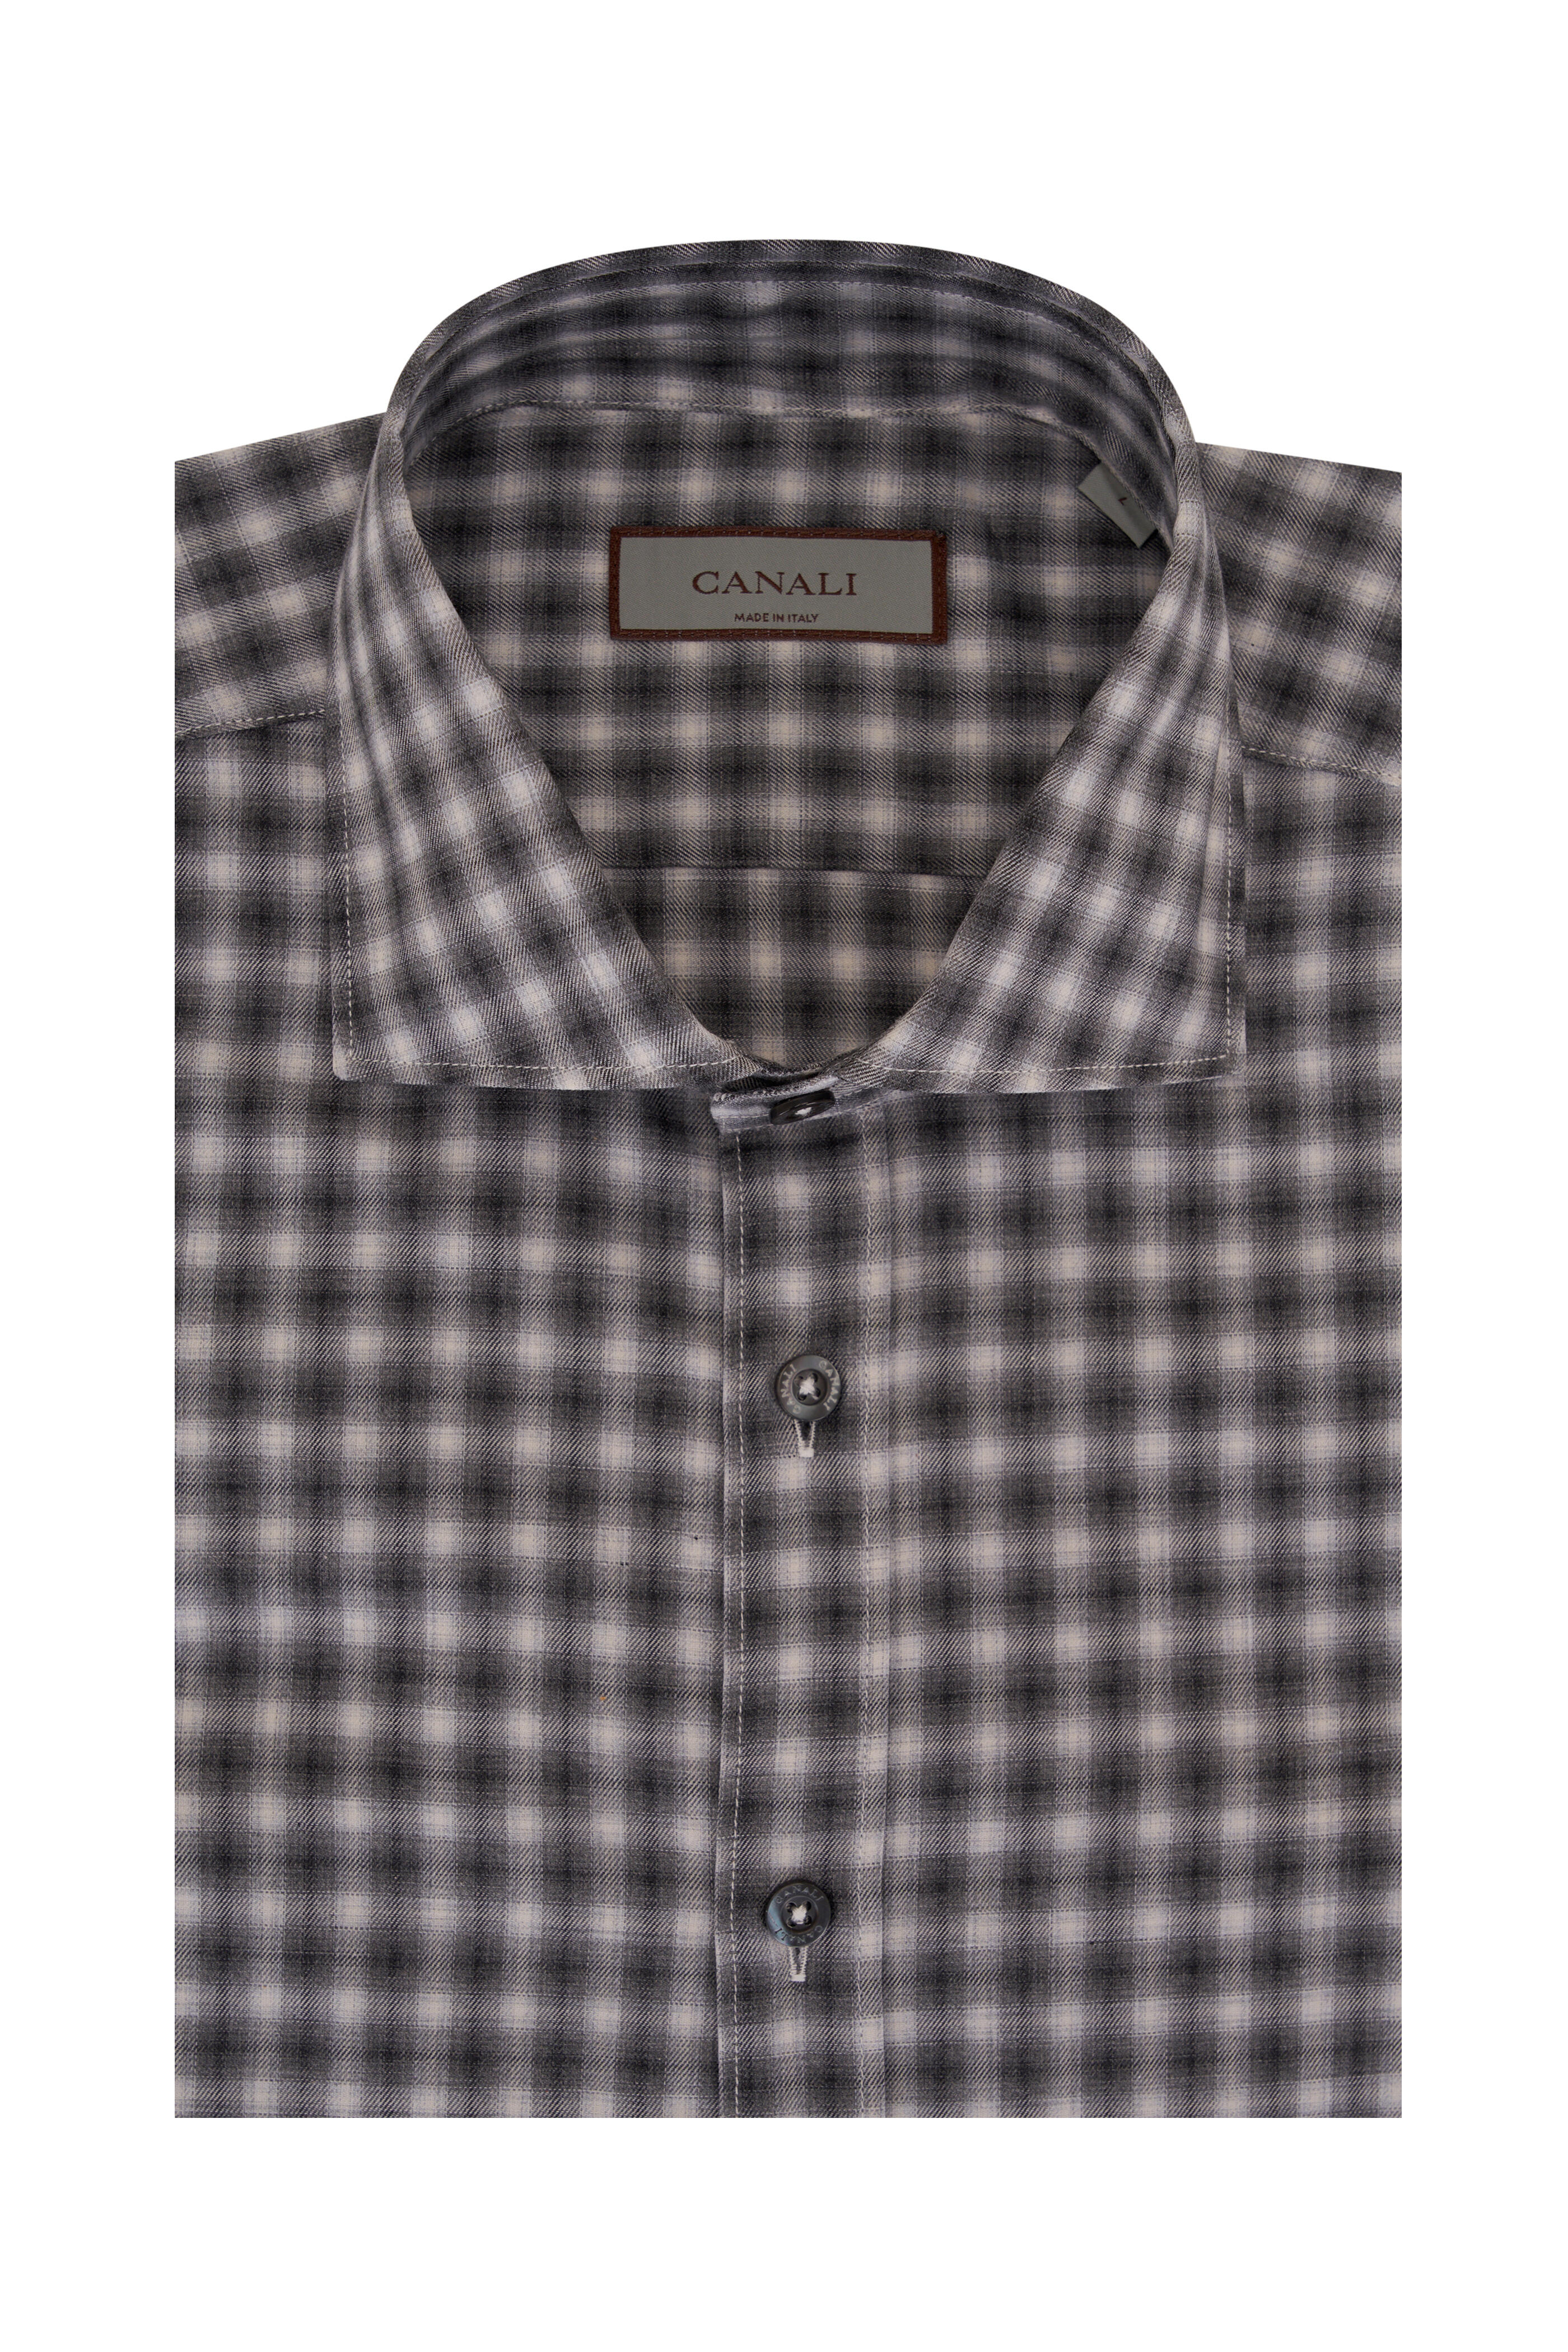 Canali - Gray & Navy Ombré Plaid Sport Shirt | Mitchell Stores